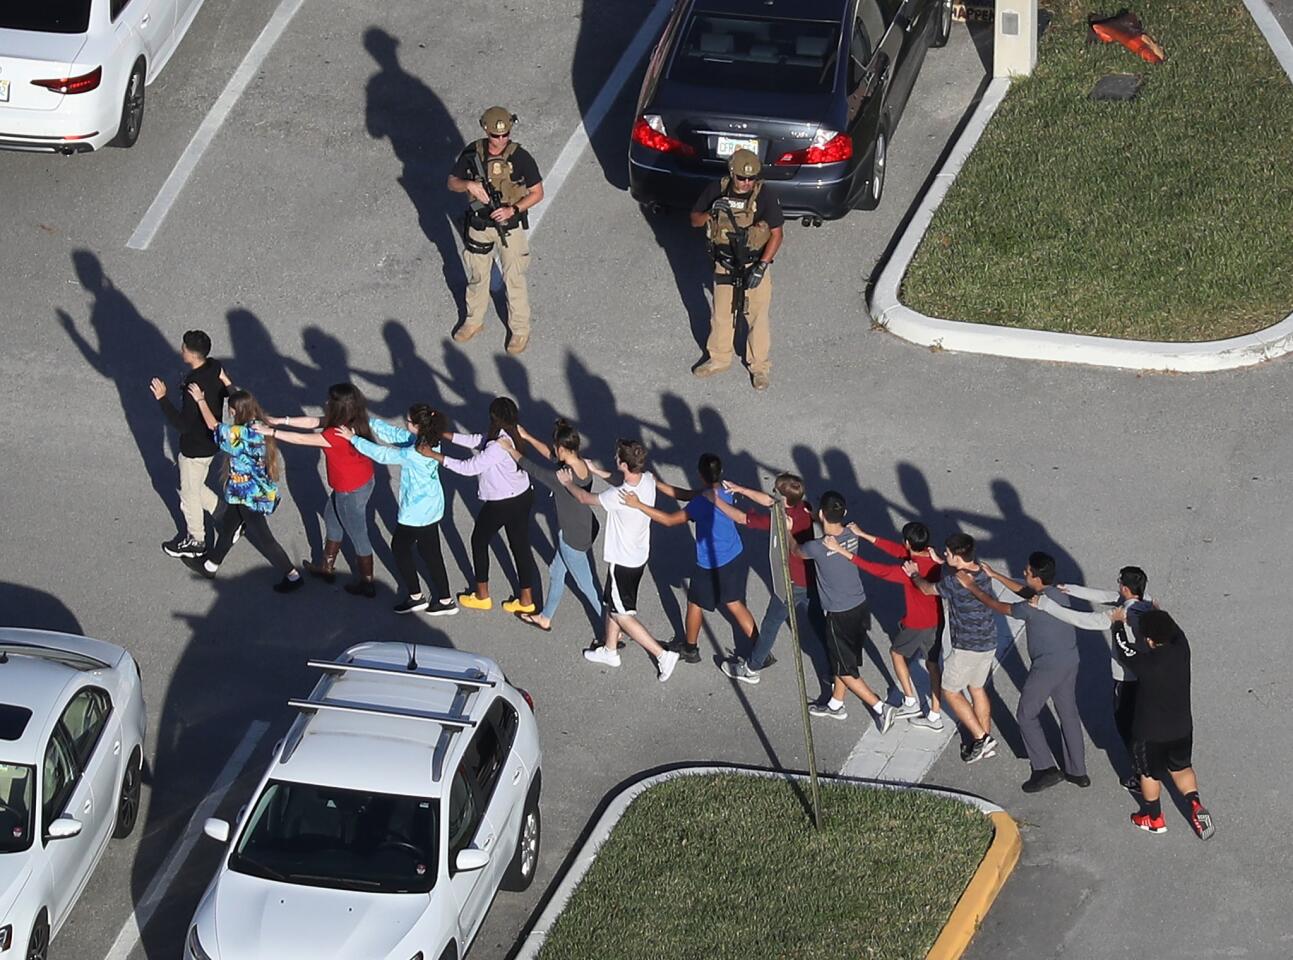 Students are brought out of the Marjory Stoneman Douglas High School after a shooting at the school that killed 17 people on Feb. 14, 2018 in Parkland, Fla.